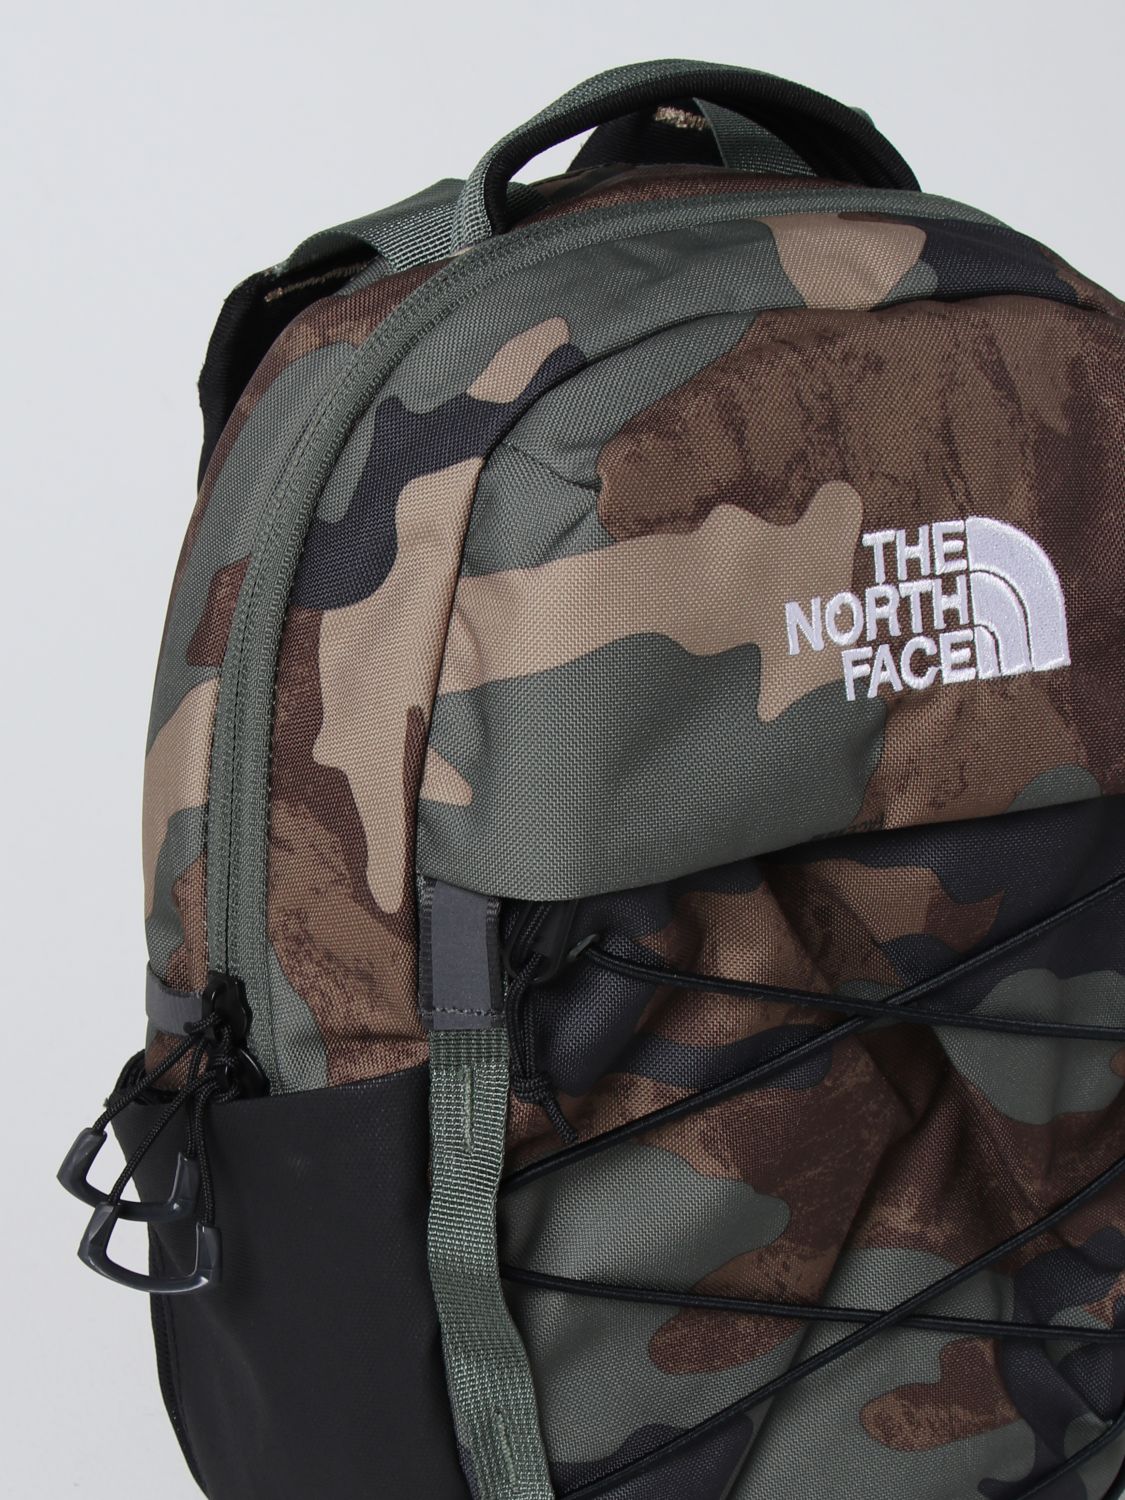 Rucksack The North Face: Rucksack herren The North Face military 3